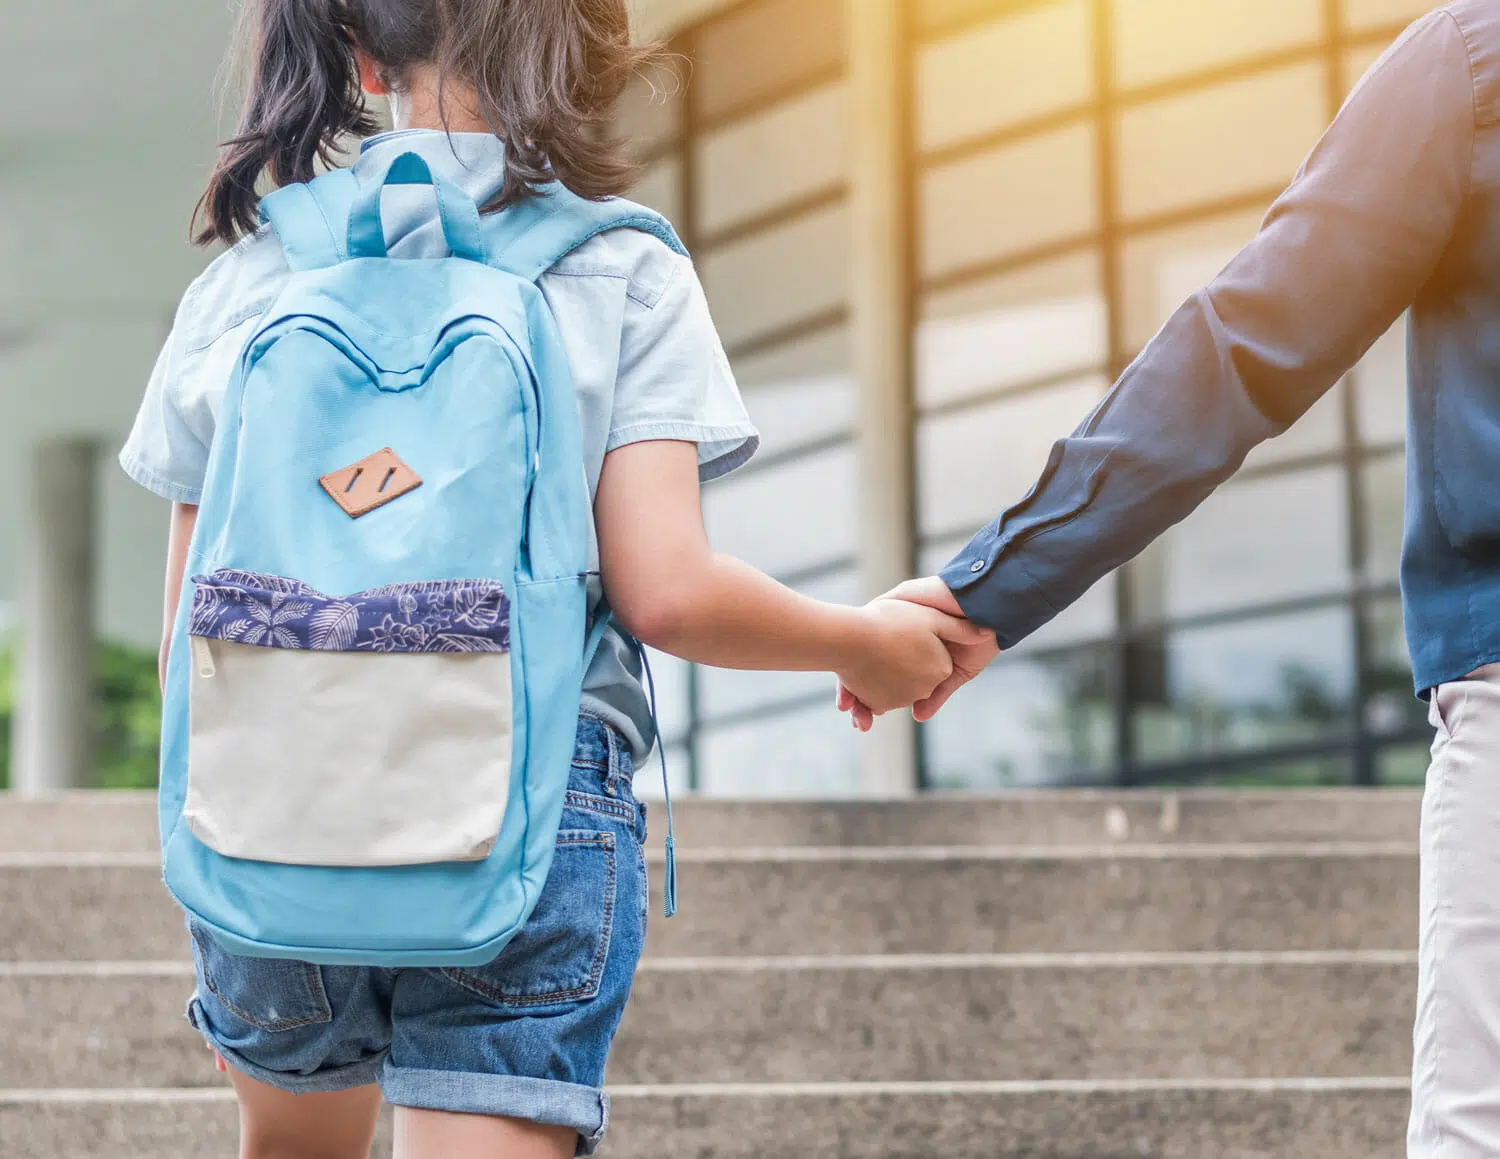 Can I Transfer My Child(ren) to Another School?